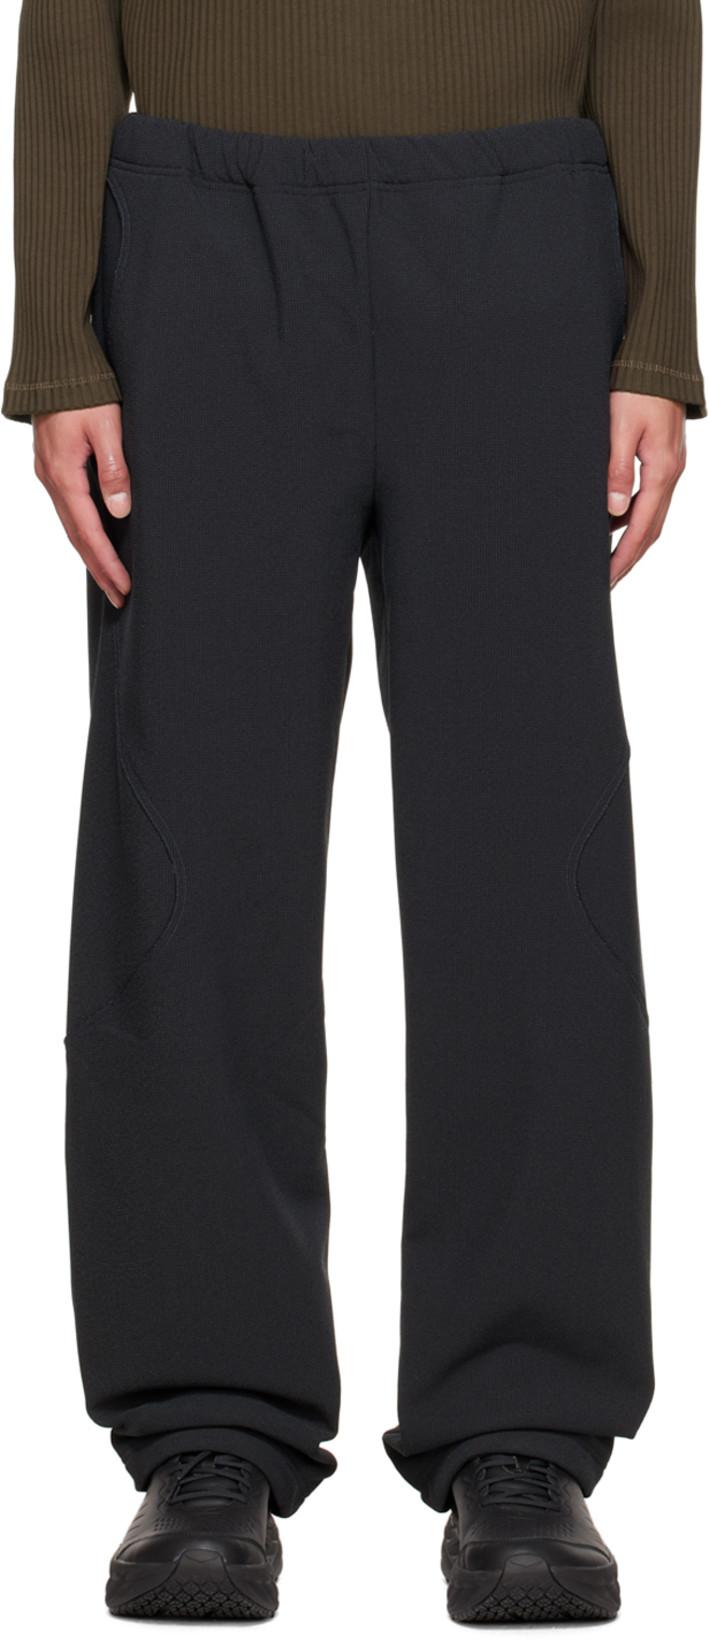 Black Transit Trousers by AFFXWRKS